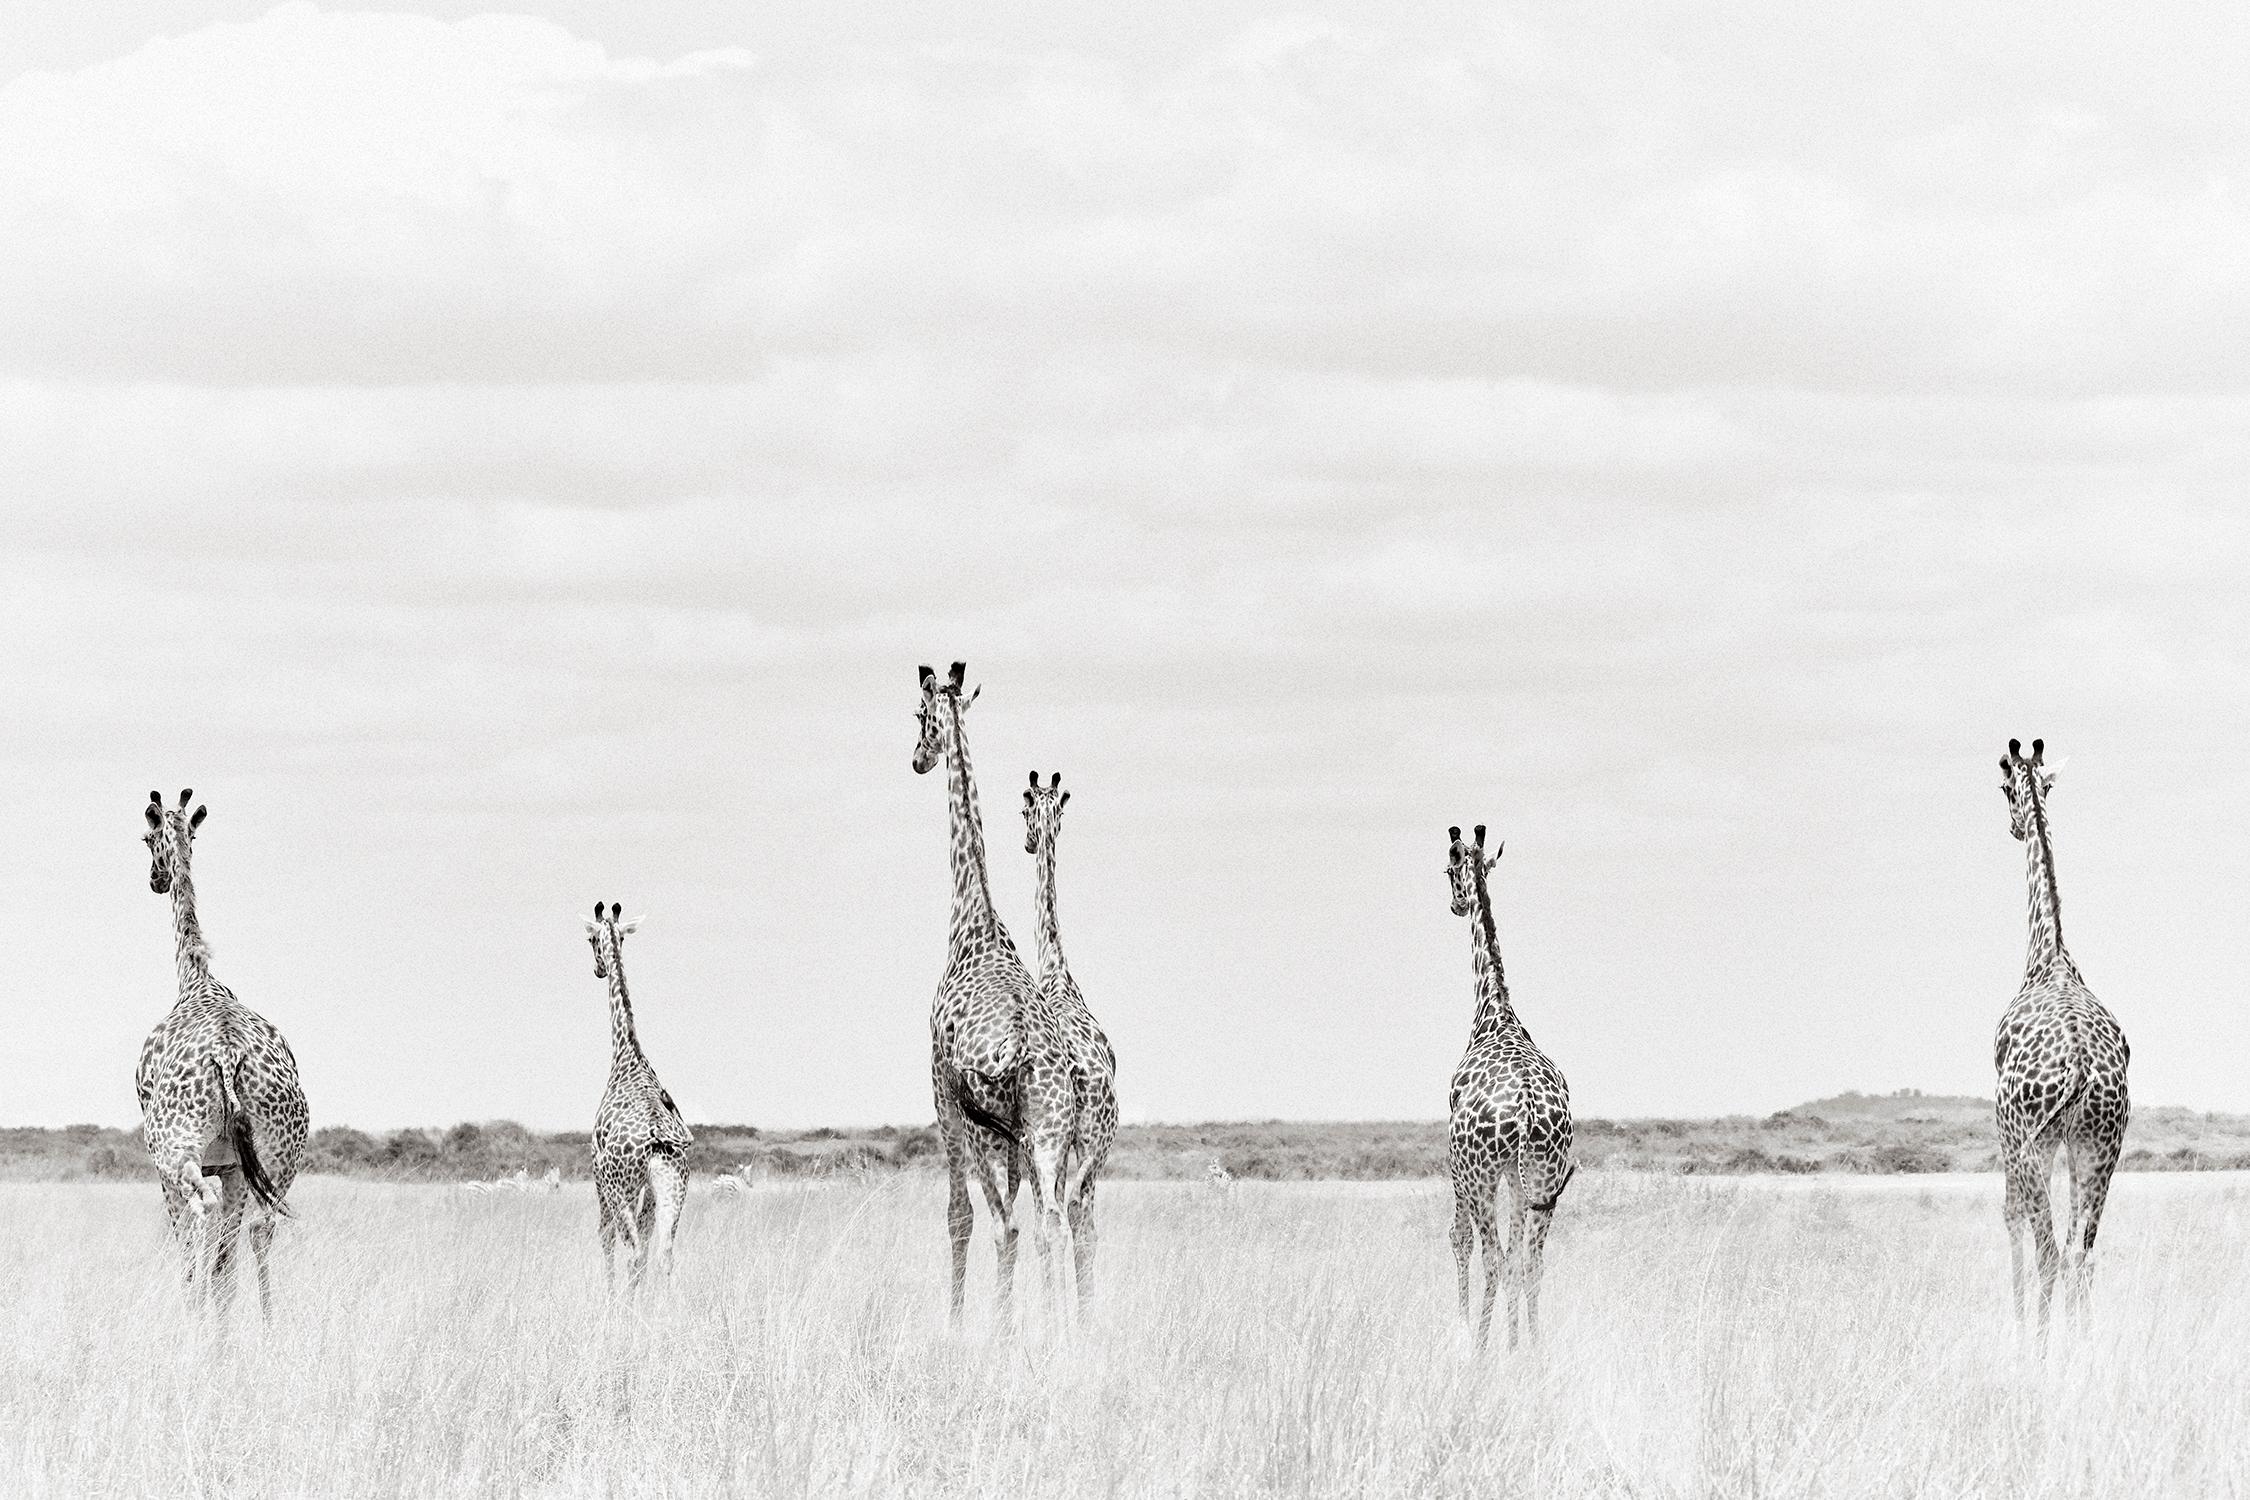 Drew Doggett Black and White Photograph - Group of Giraffes Looking at Something in Distance, Wildlife, Kenya